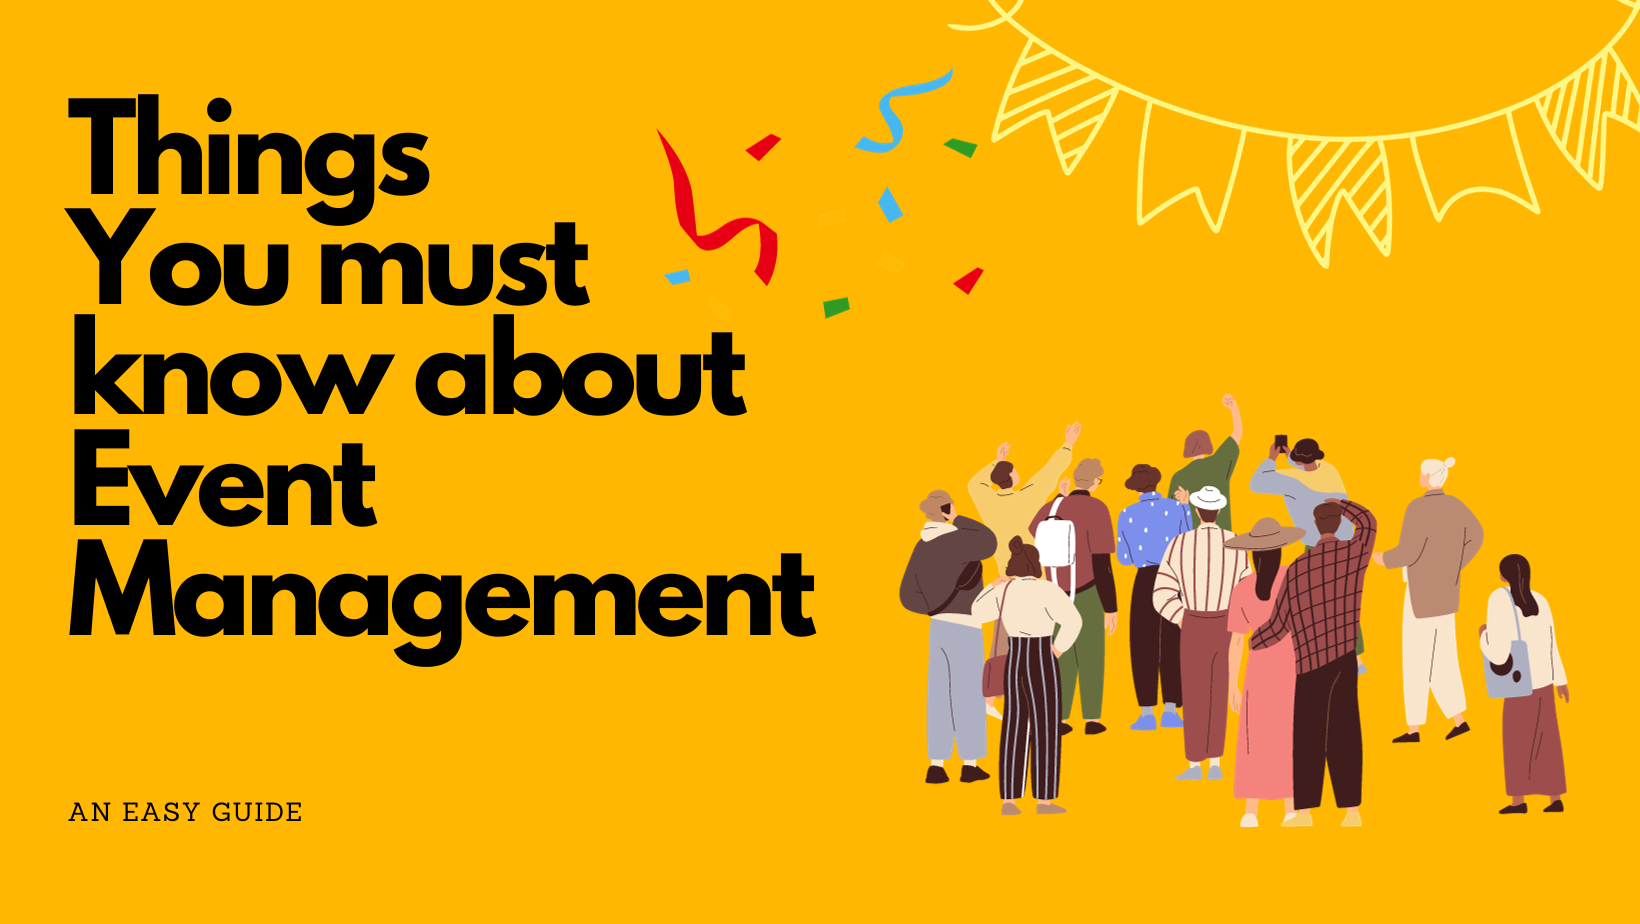 An easy guide for event management 